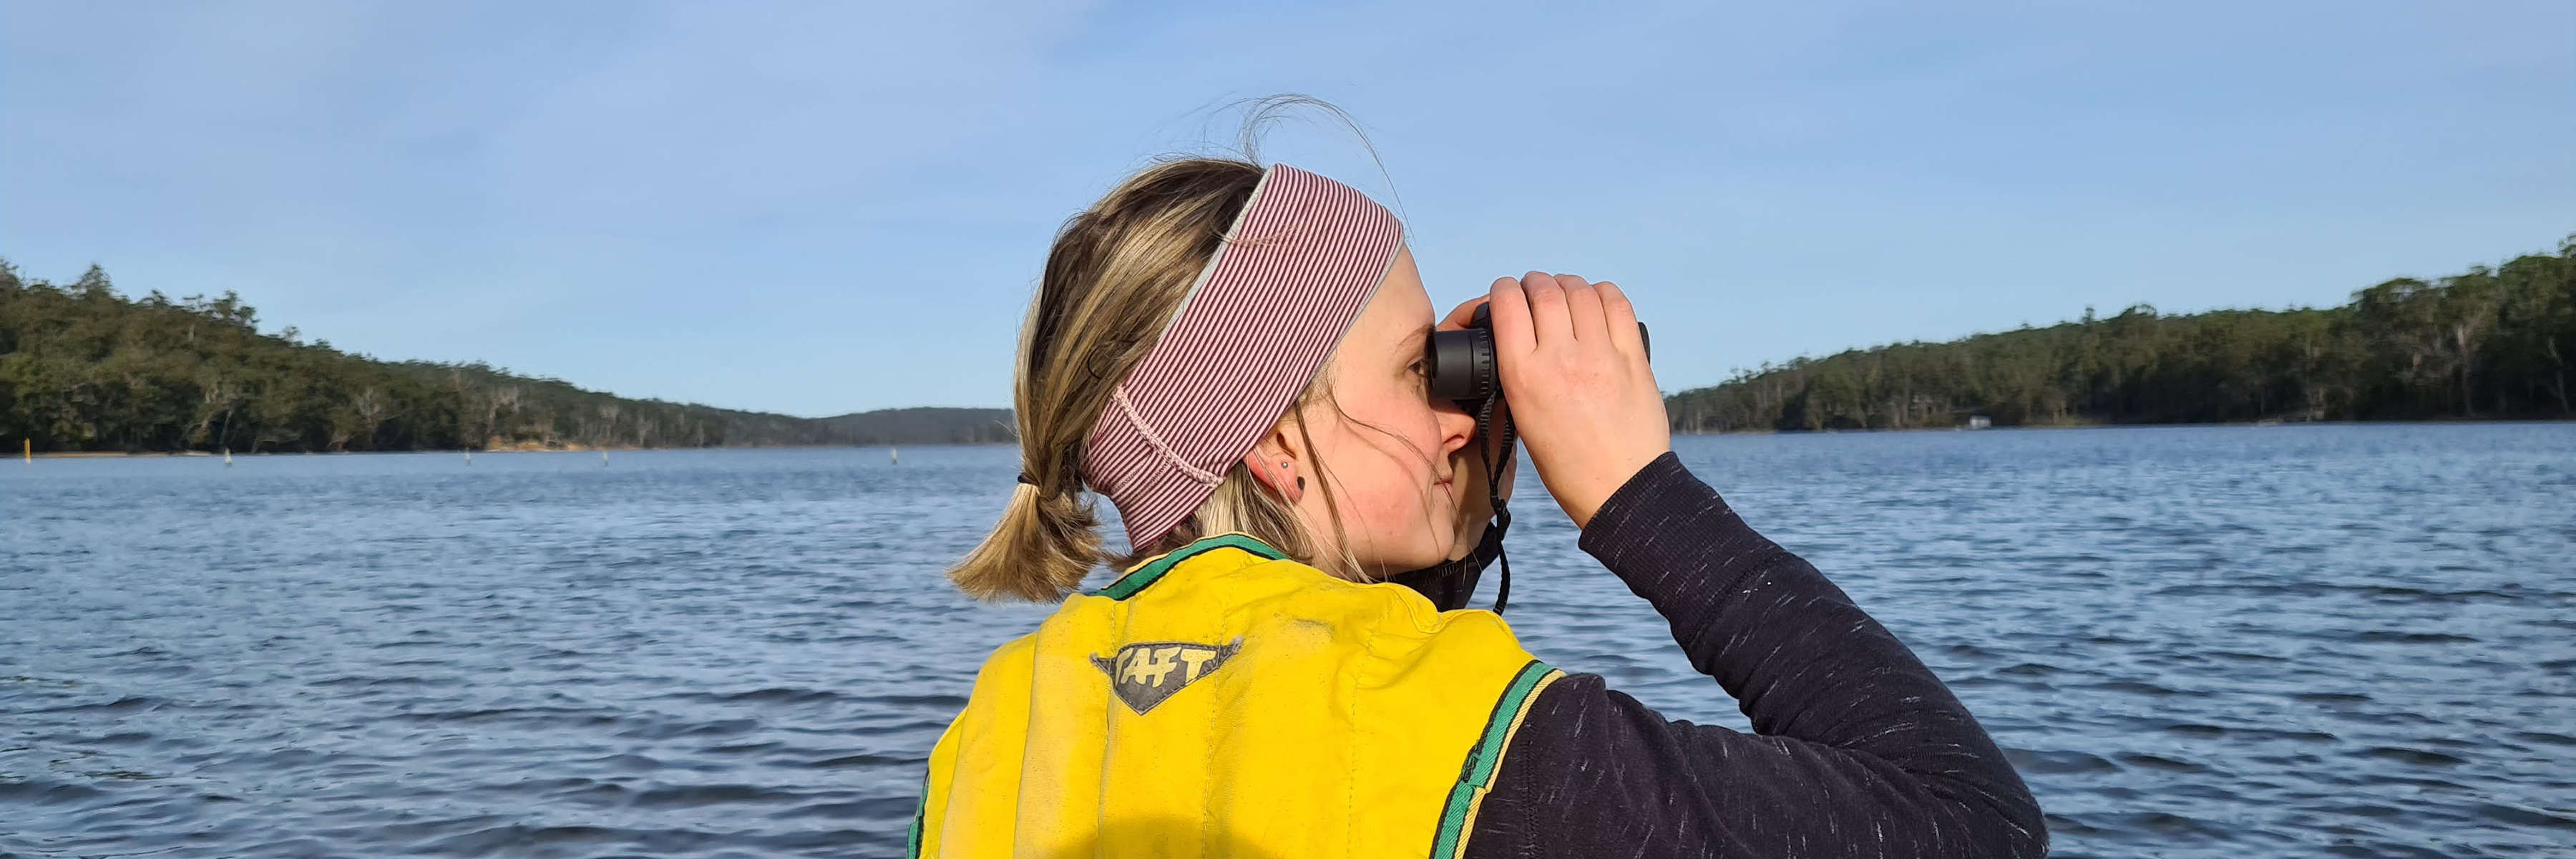 A woman in her twenties in a yellow life jacket at the front of a large kayak on the water, surrounded by land in the distance, looks with binoculars to the right of the photo as part of her Where? Where? Wedgie! surveys. Photo: Kelsey Picard.